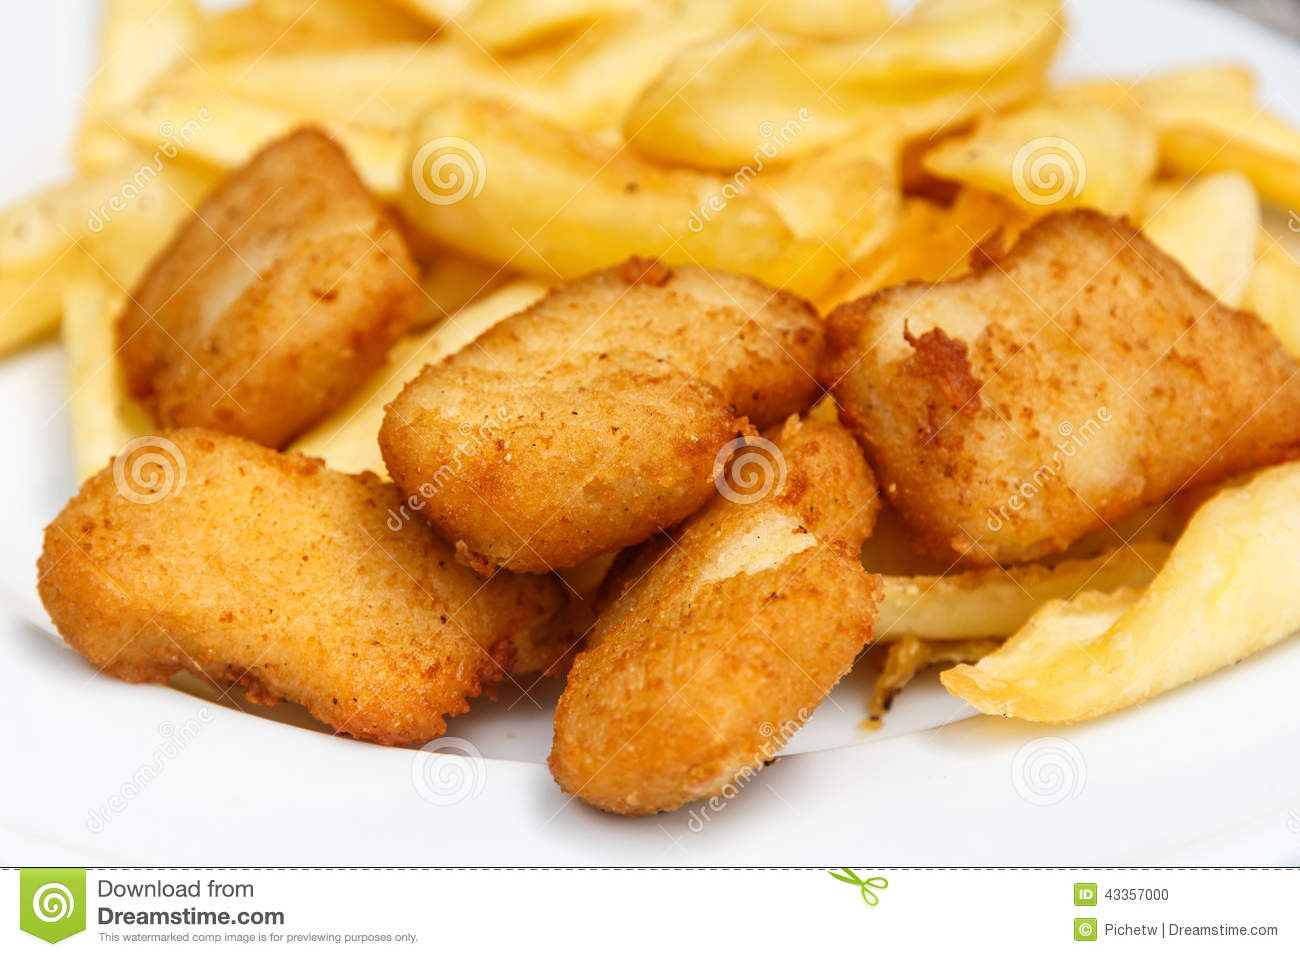 Fried Chicken Nuggets
 Golden Fried Chicken Nug s Stock Image of